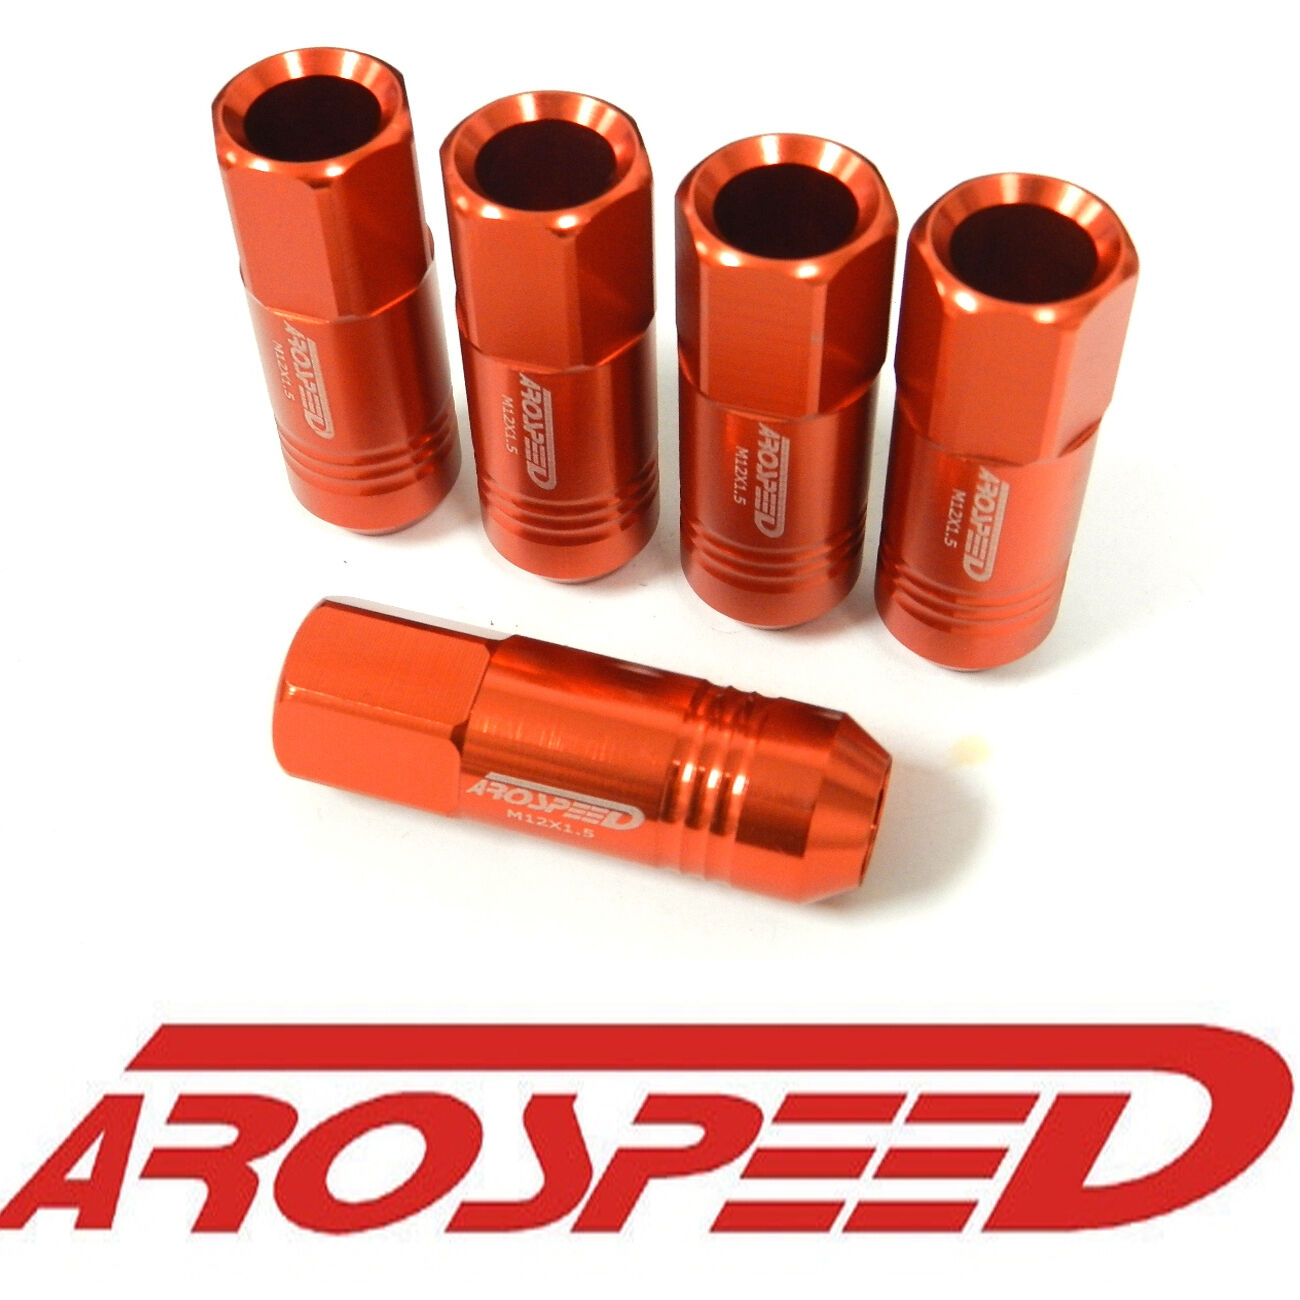 20PC 12X1.25MM 60MM EXTENDED FORGED ALUMINUM TUNER RACING LUG NUT ORANGE